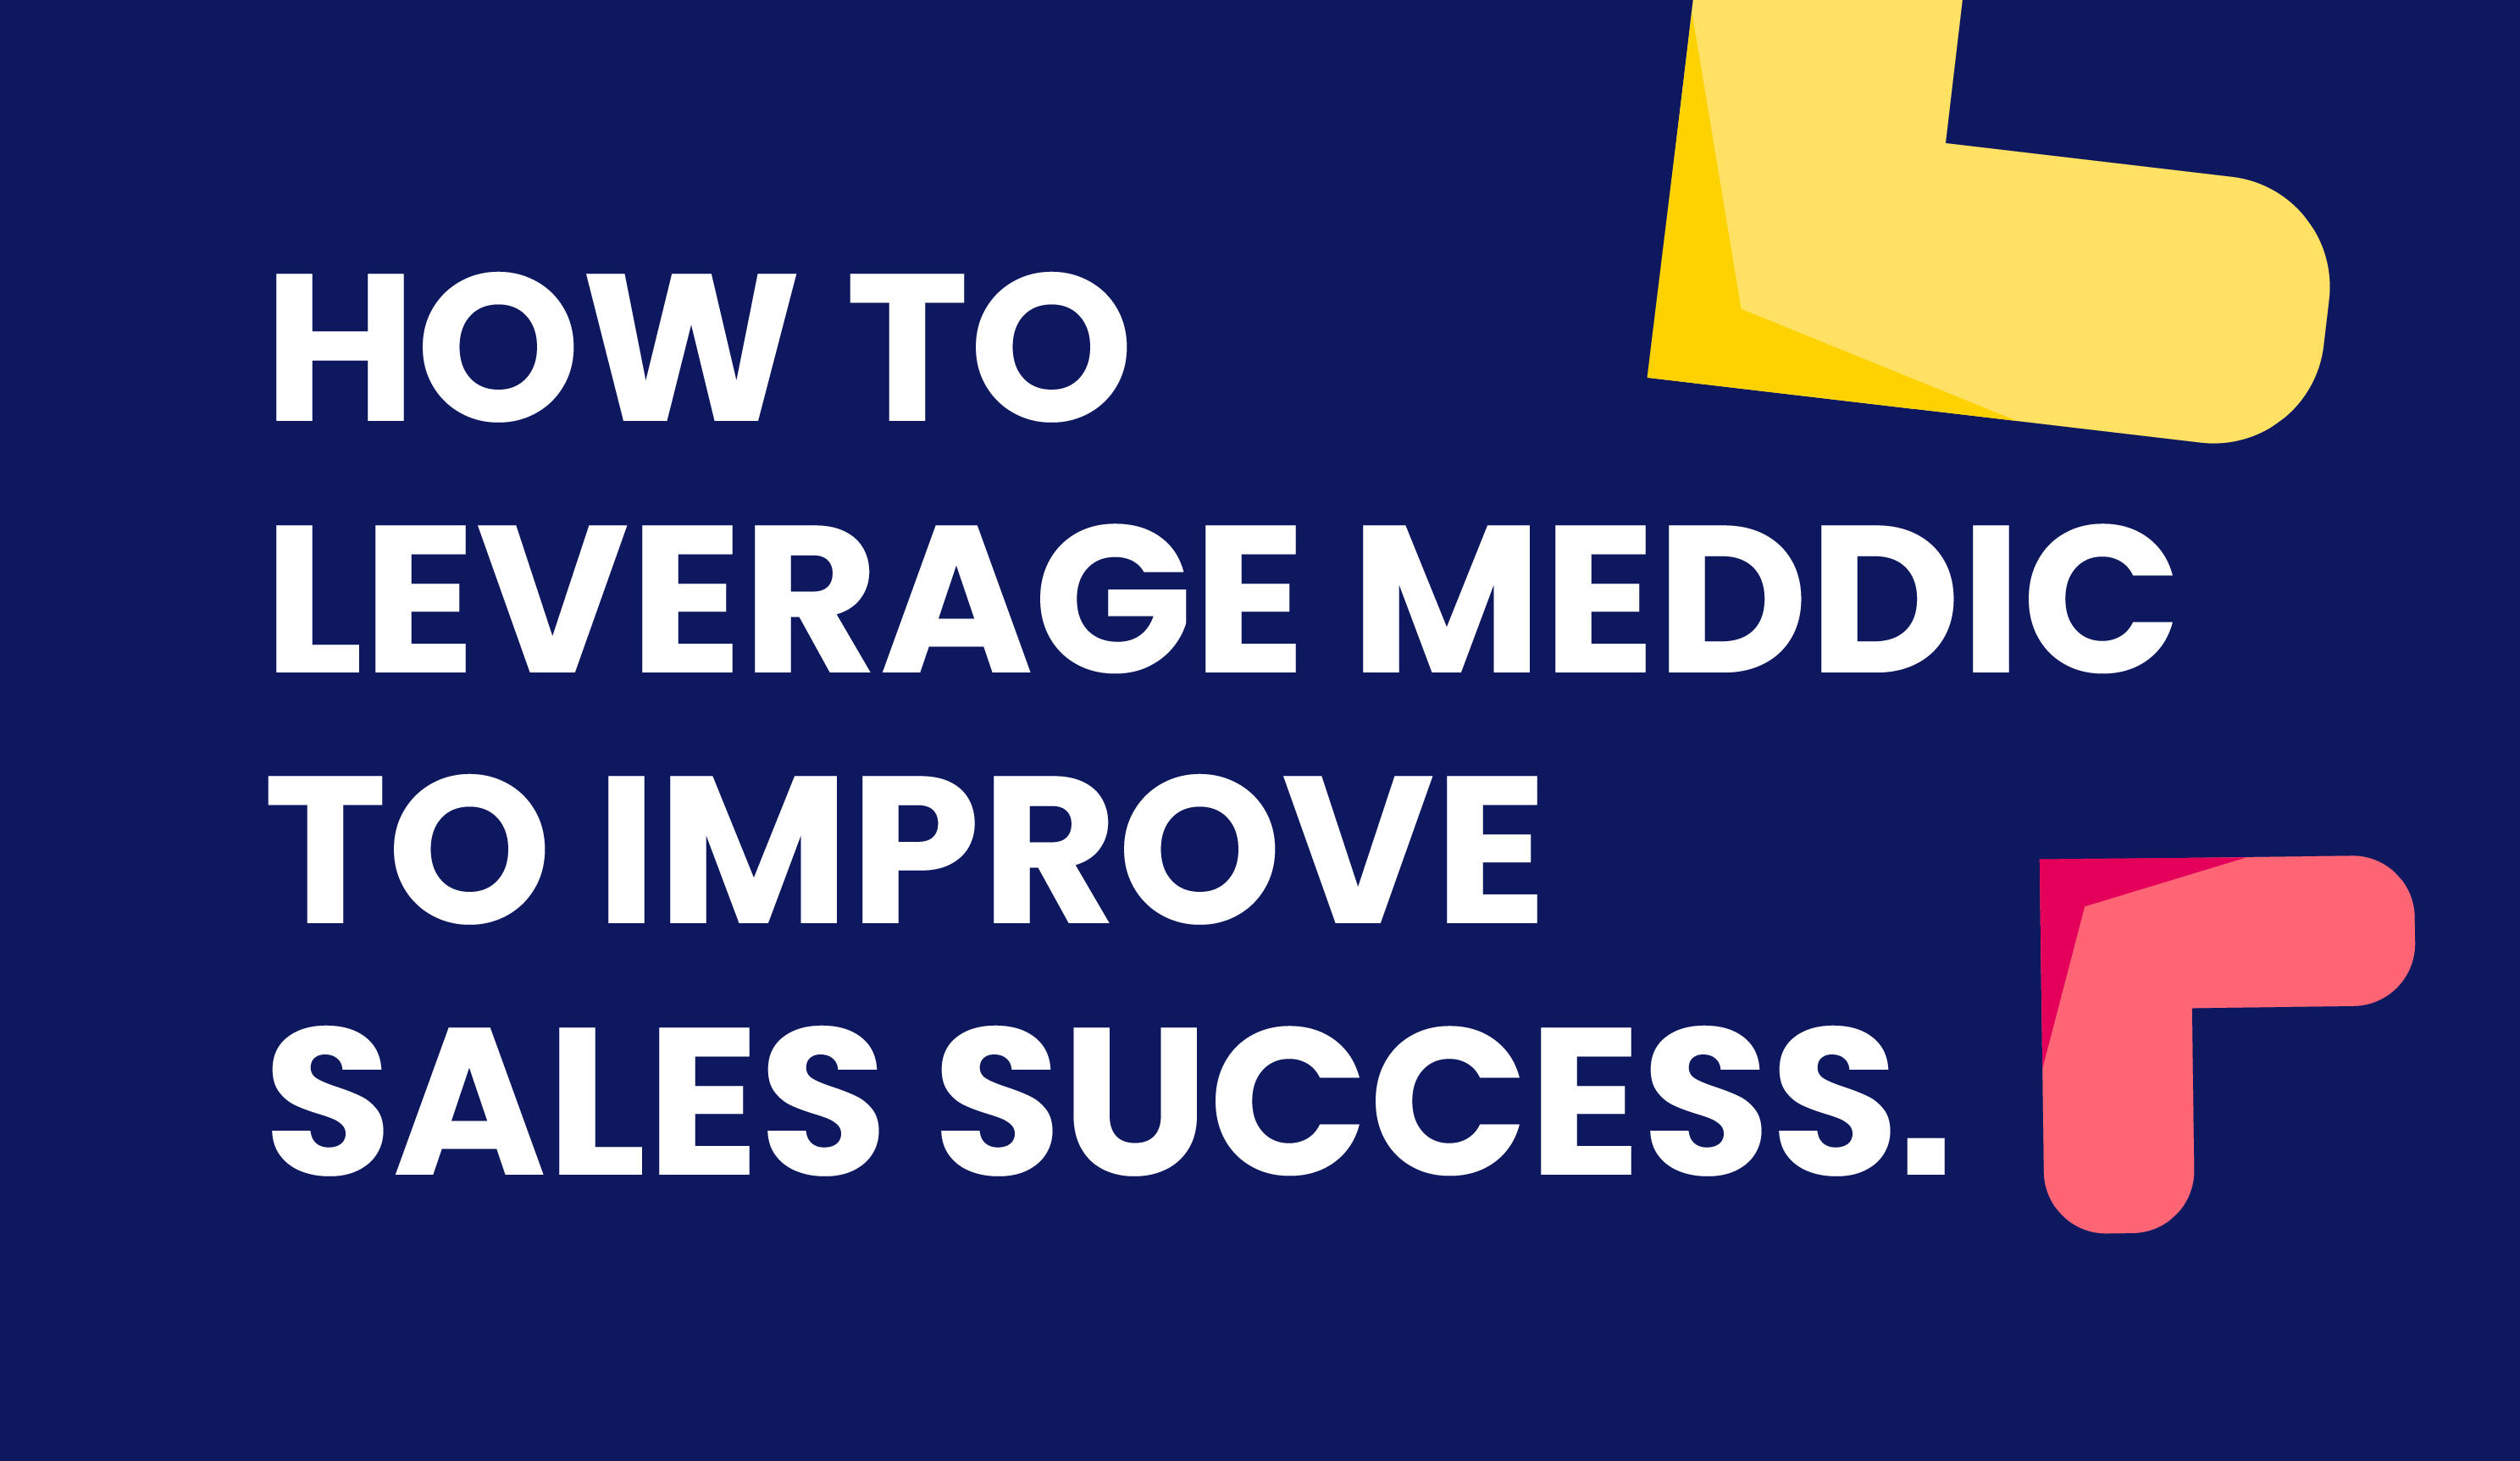 How to Leverage MEDDIC To Improve Sales Success: A Comprehensive Guide